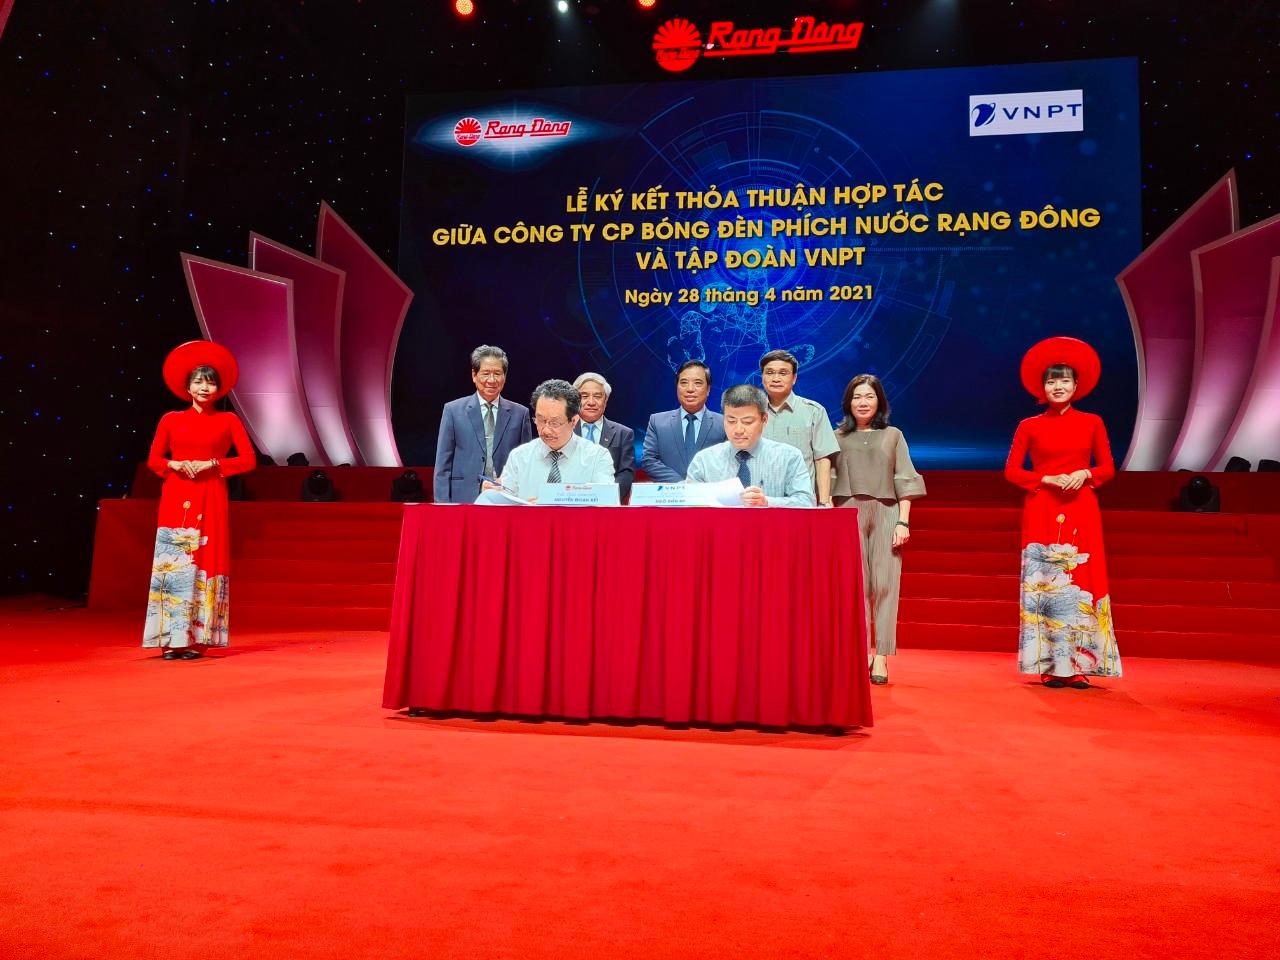 VNPT Group signs a cooperation agreement with Rang Dong